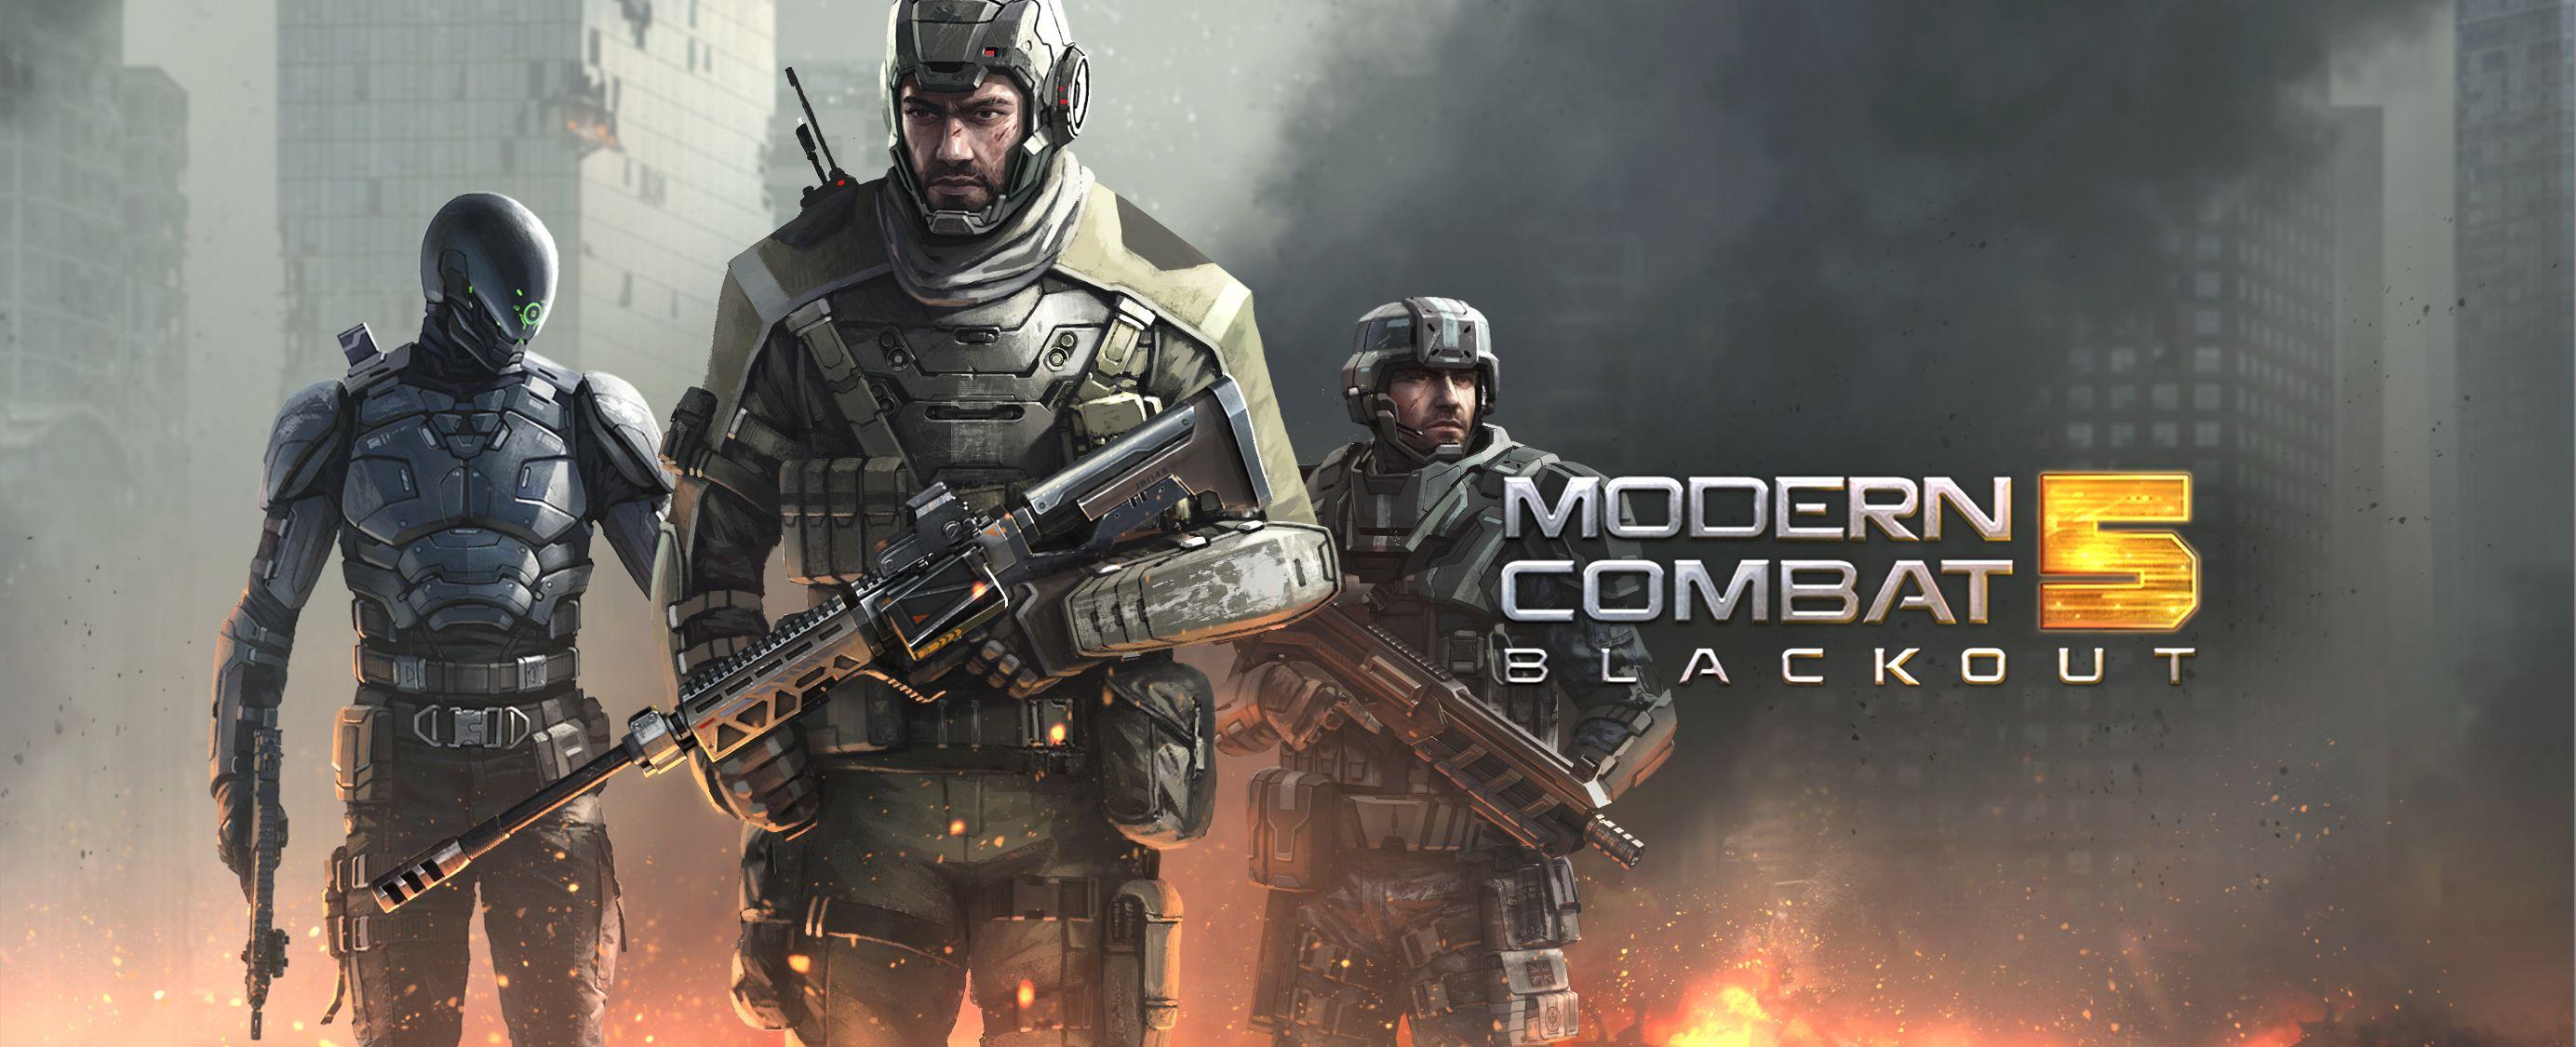 modern combat 5: blackout free online games android